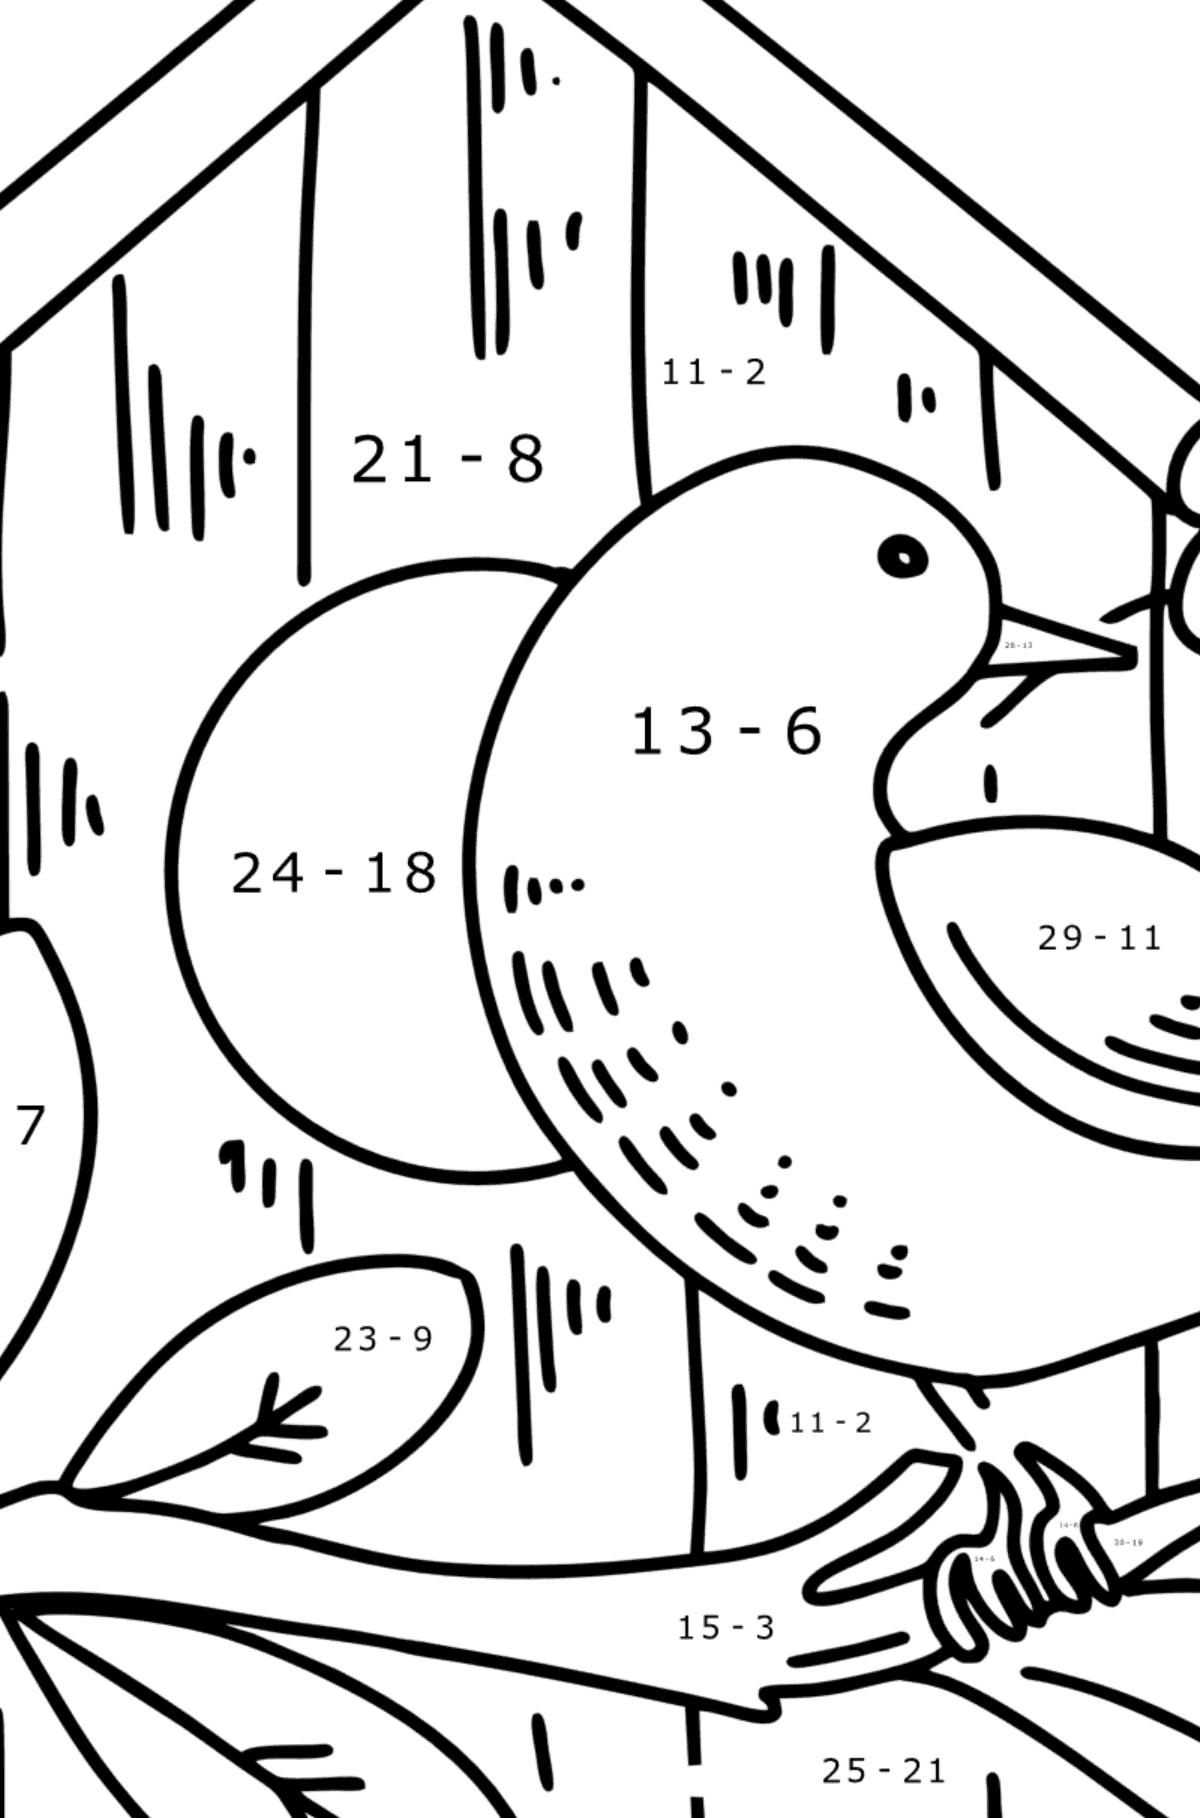 Starling at the Birdhouse coloring page - Math Coloring - Subtraction for Kids